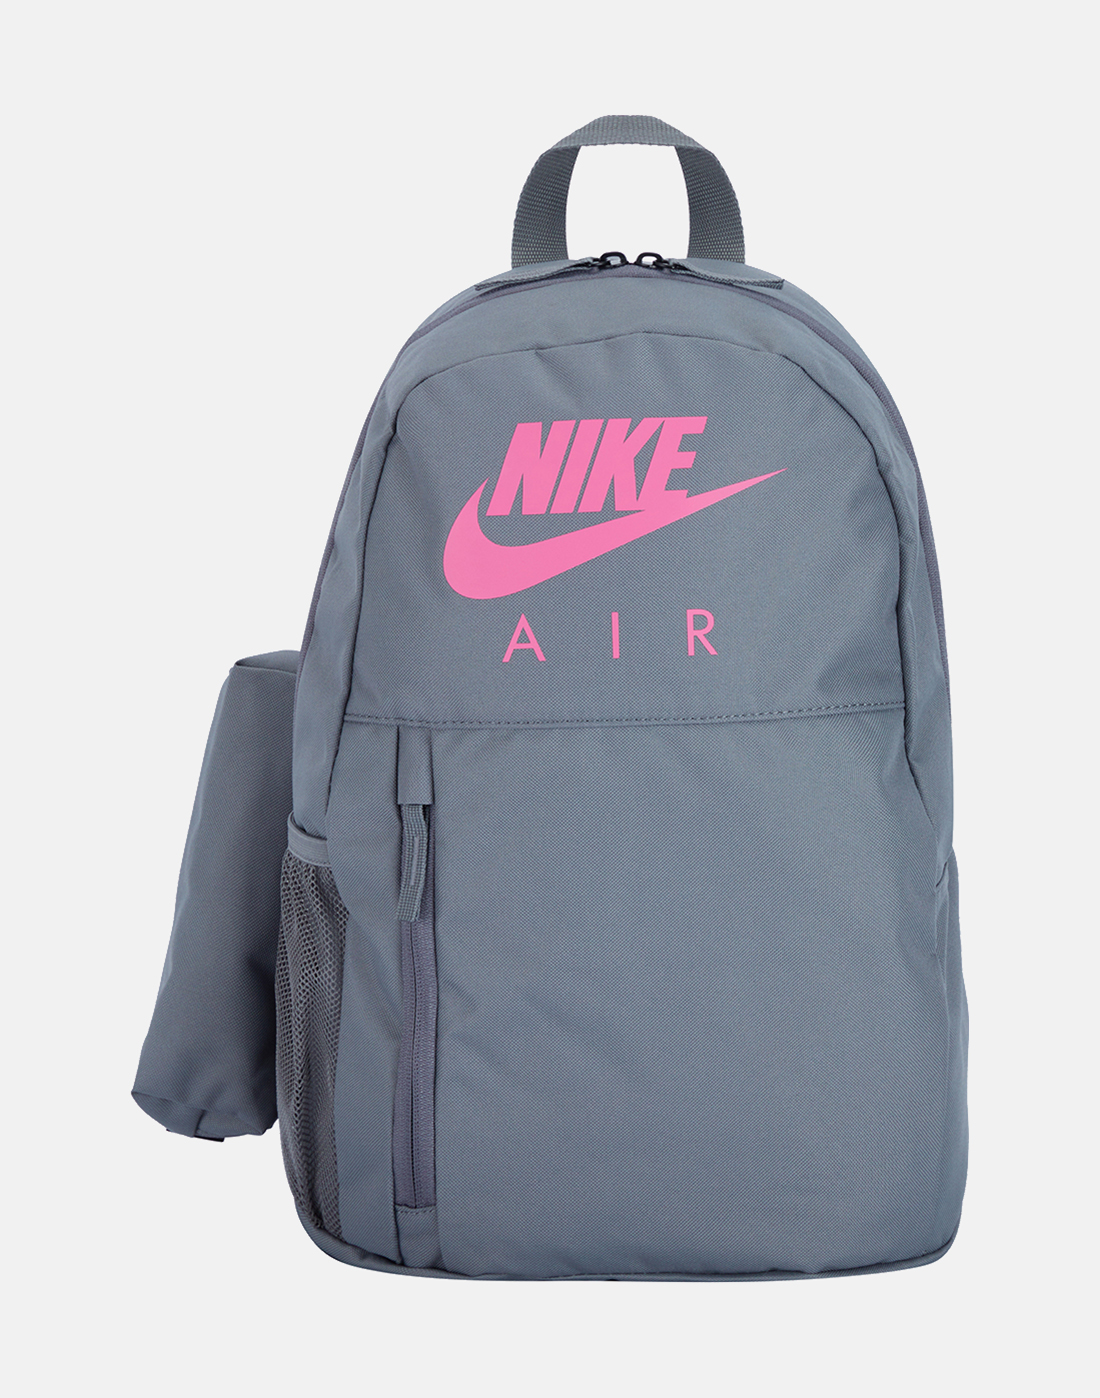 Nike Bags - Shop Latest Nike Bag Online Starting from ₹1000 | Myntra